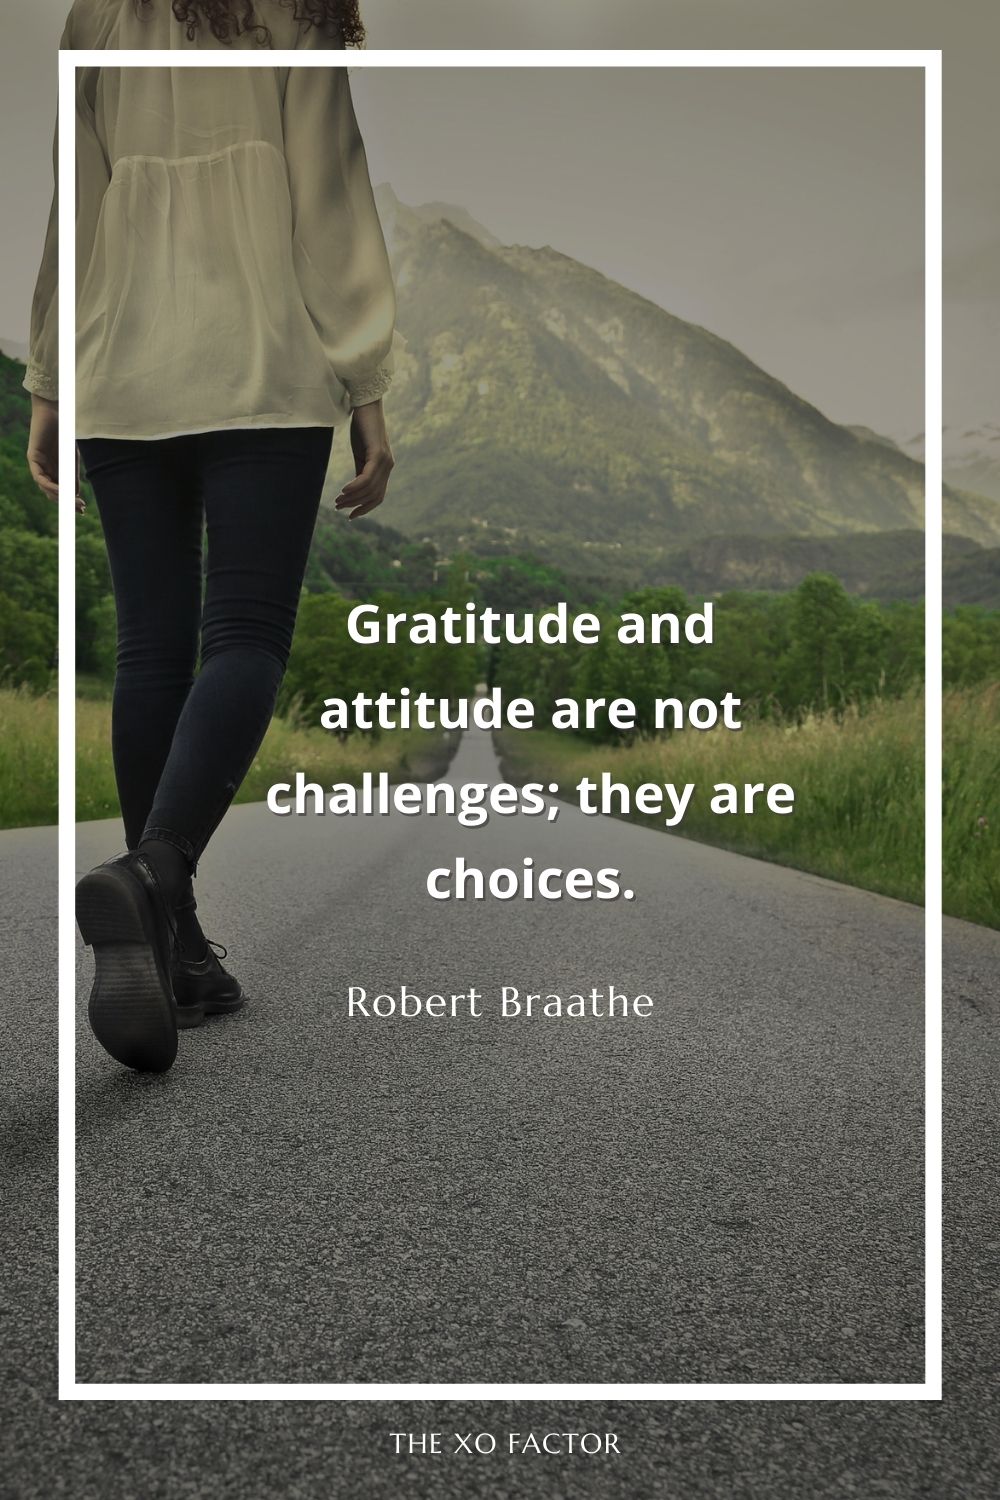 Gratitude and attitude are not challenges; they are choices.